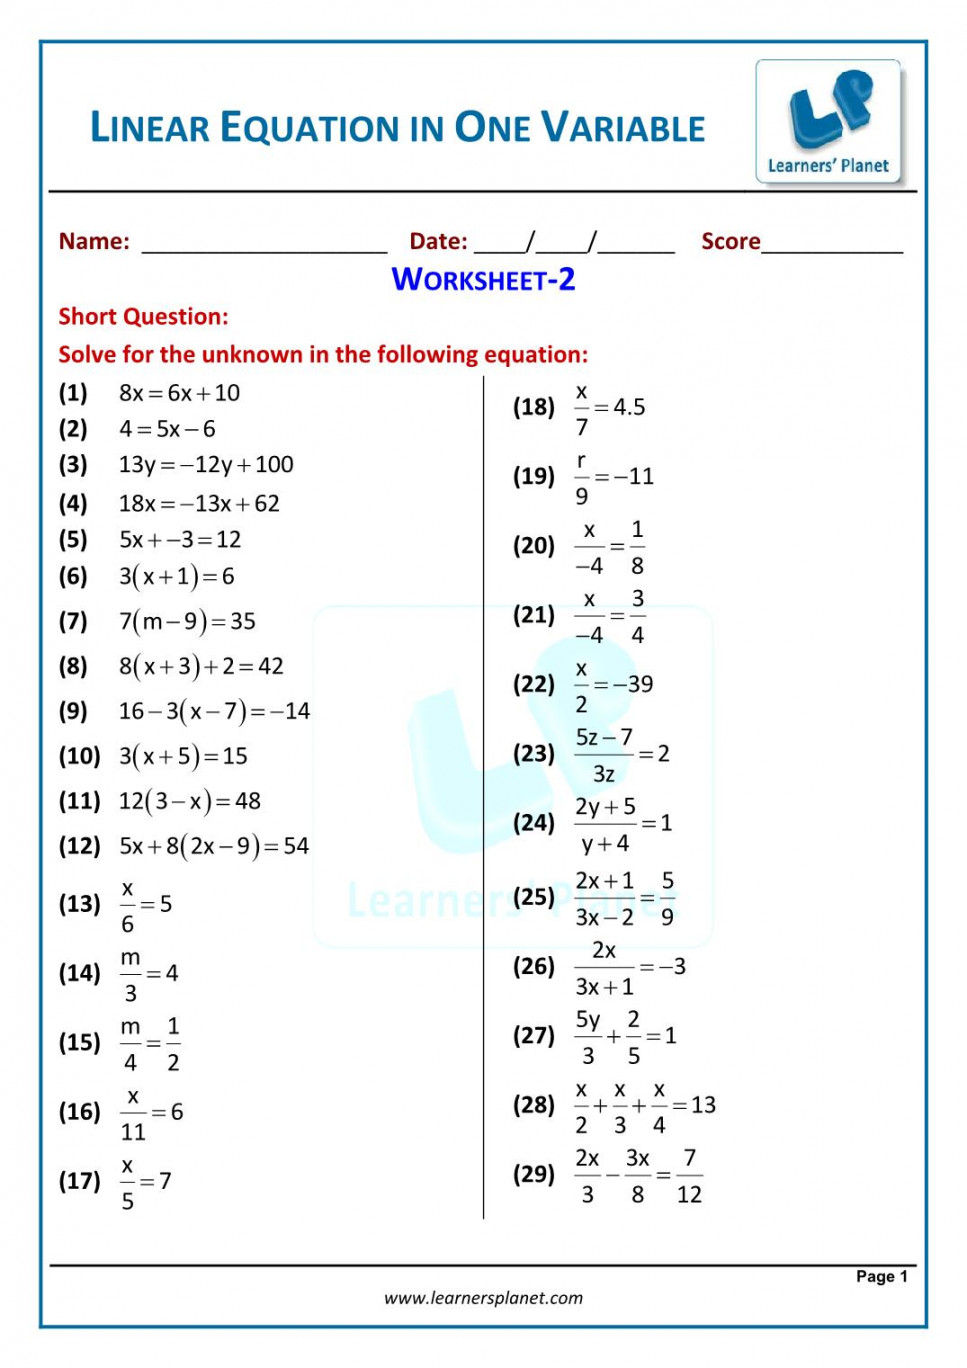 Worksheet for linear equations in one variable class  maths